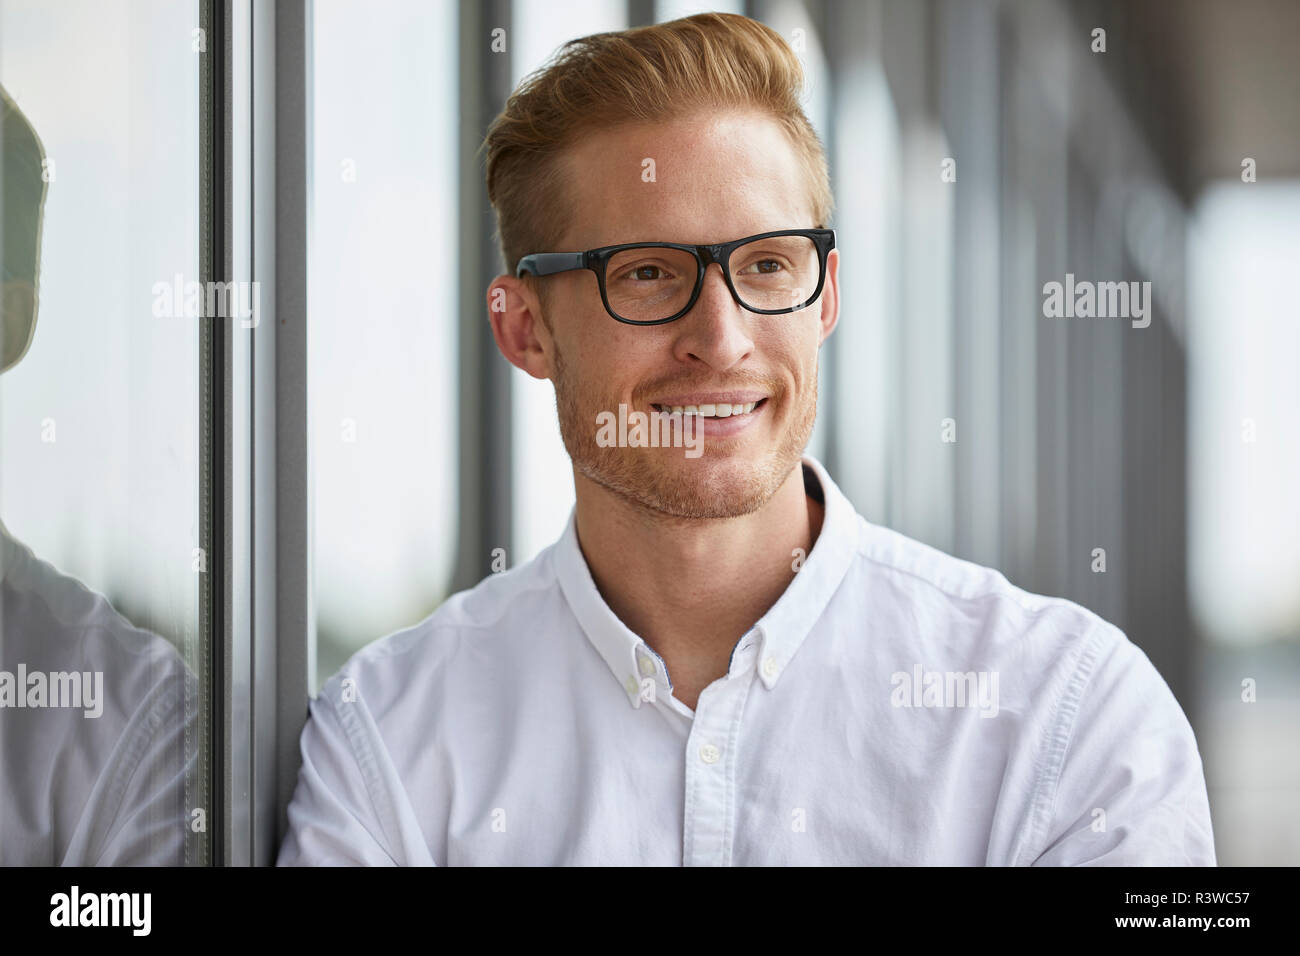 Portrait of smiling businessman leaning against window Stock Photo